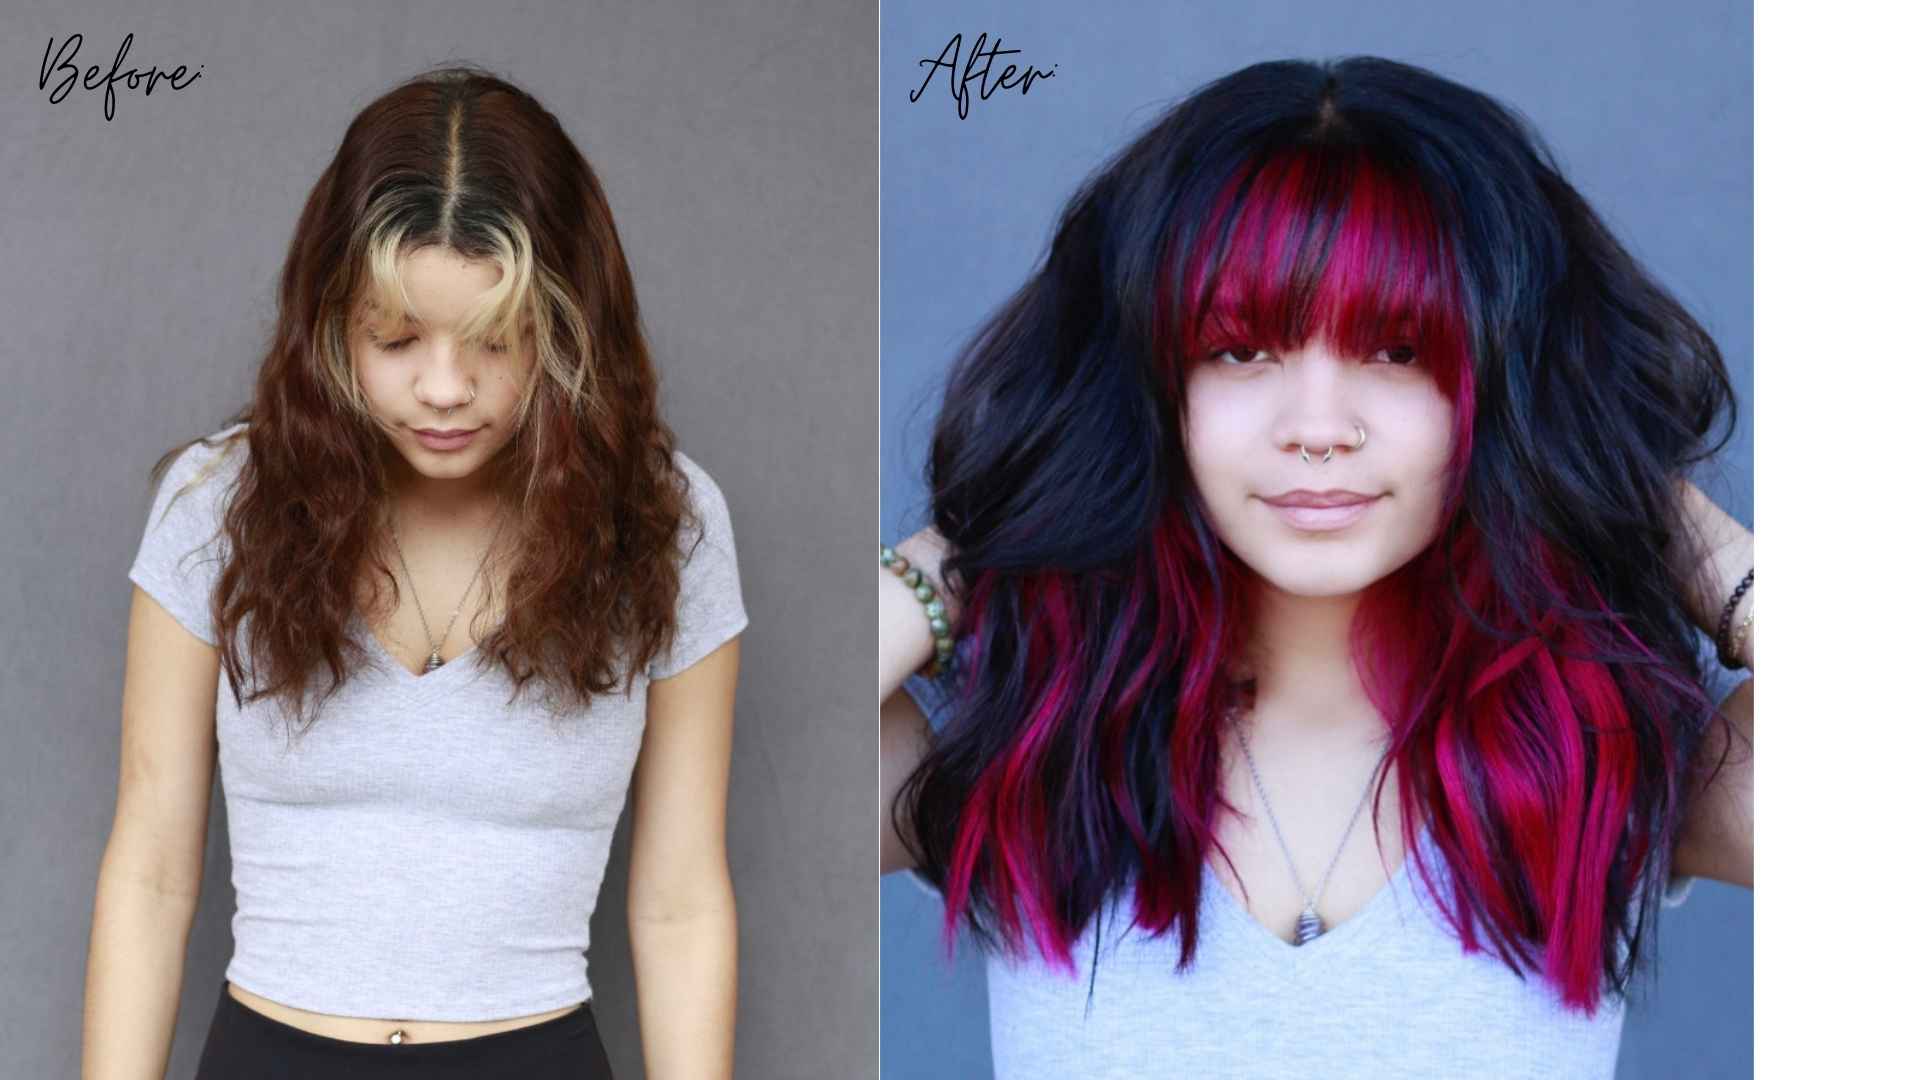 3. "20 Stunning Peekaboo Hair Color Ideas for a Bold and Vibrant Look" - wide 3